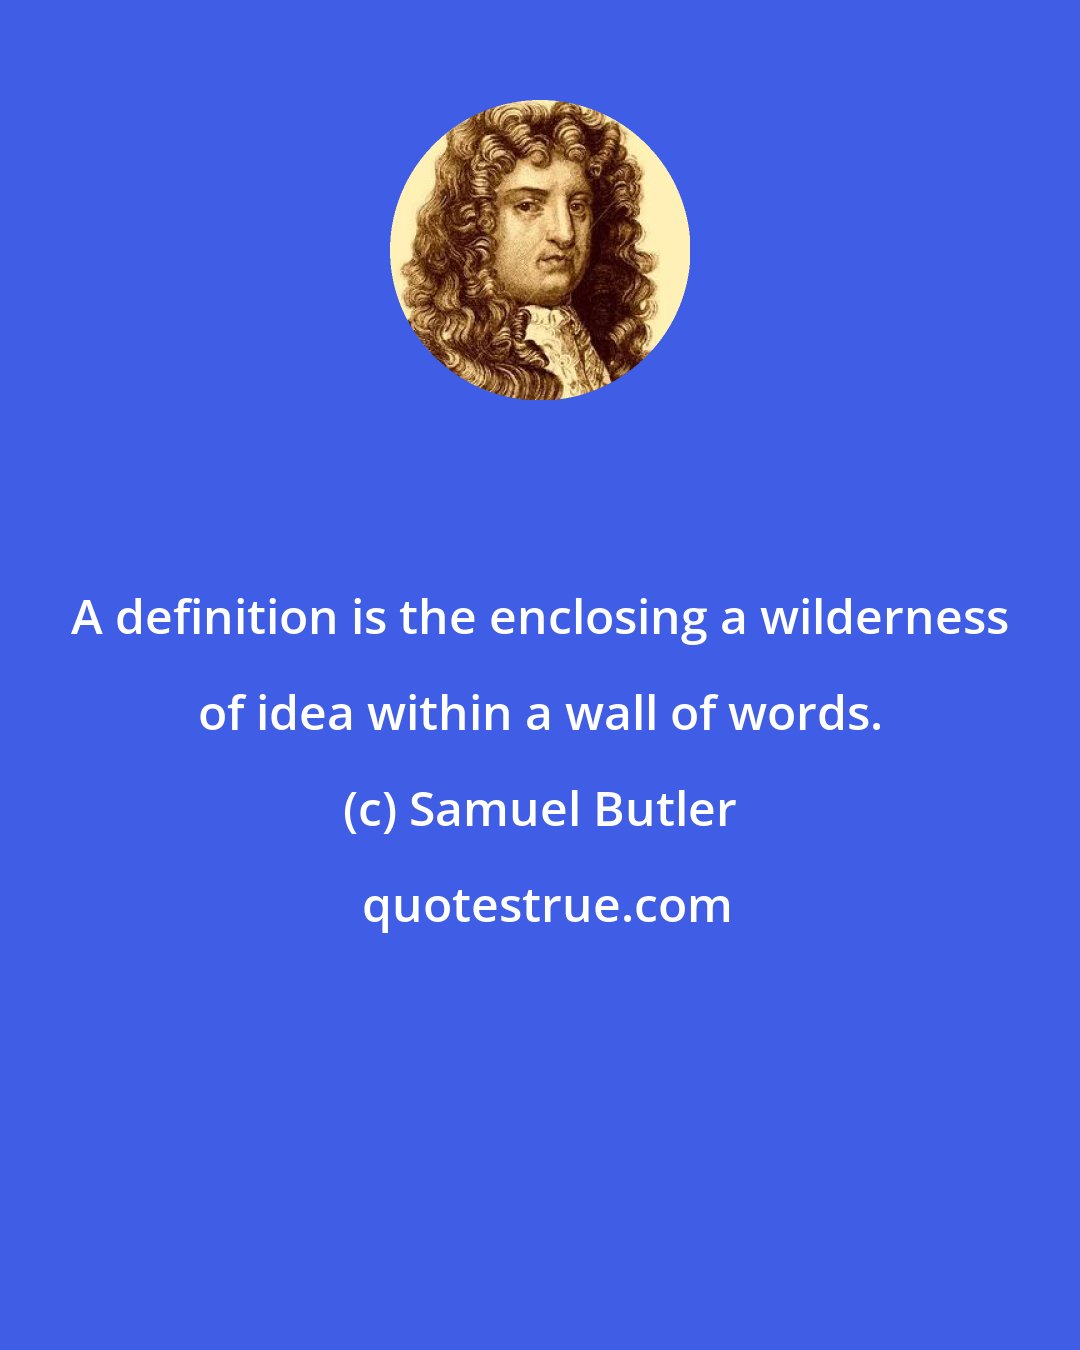 Samuel Butler: A definition is the enclosing a wilderness of idea within a wall of words.